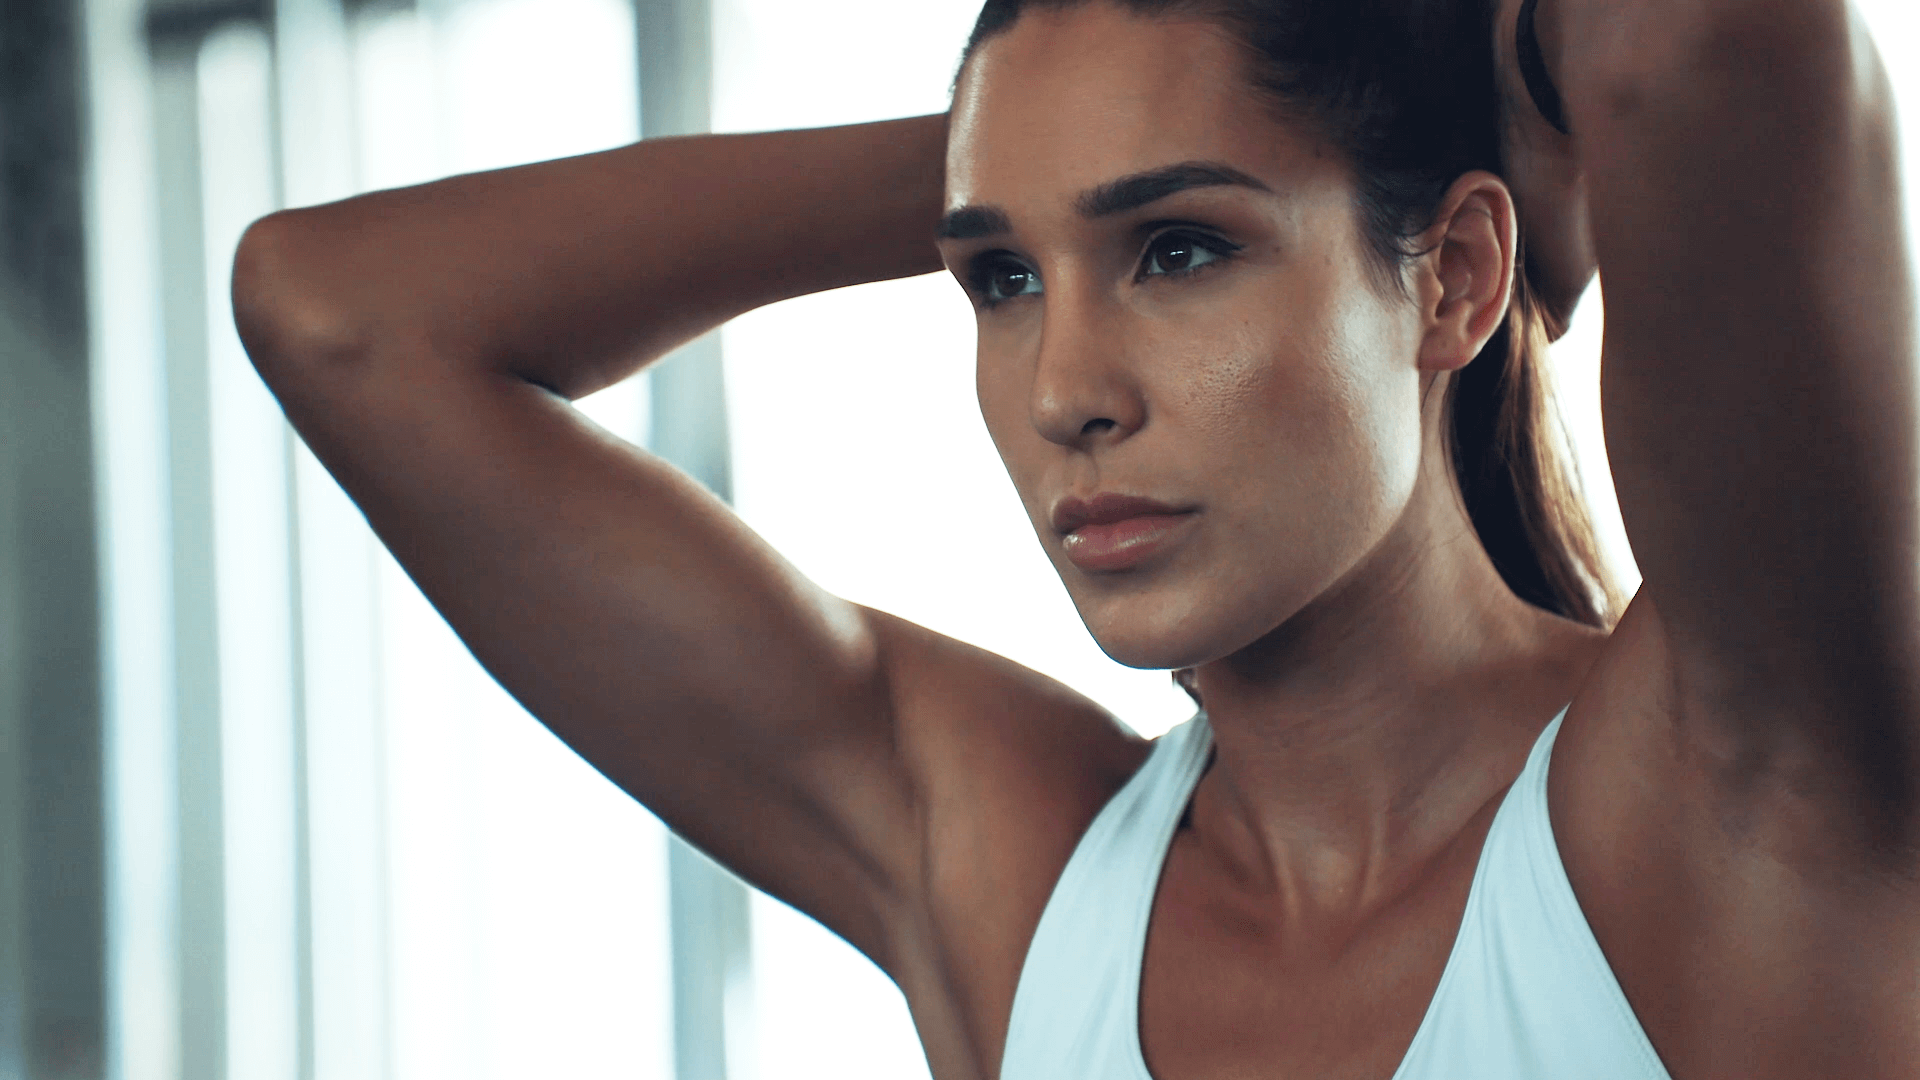 Kayla Itsines’ Plastic Surgery – What We Know So Far